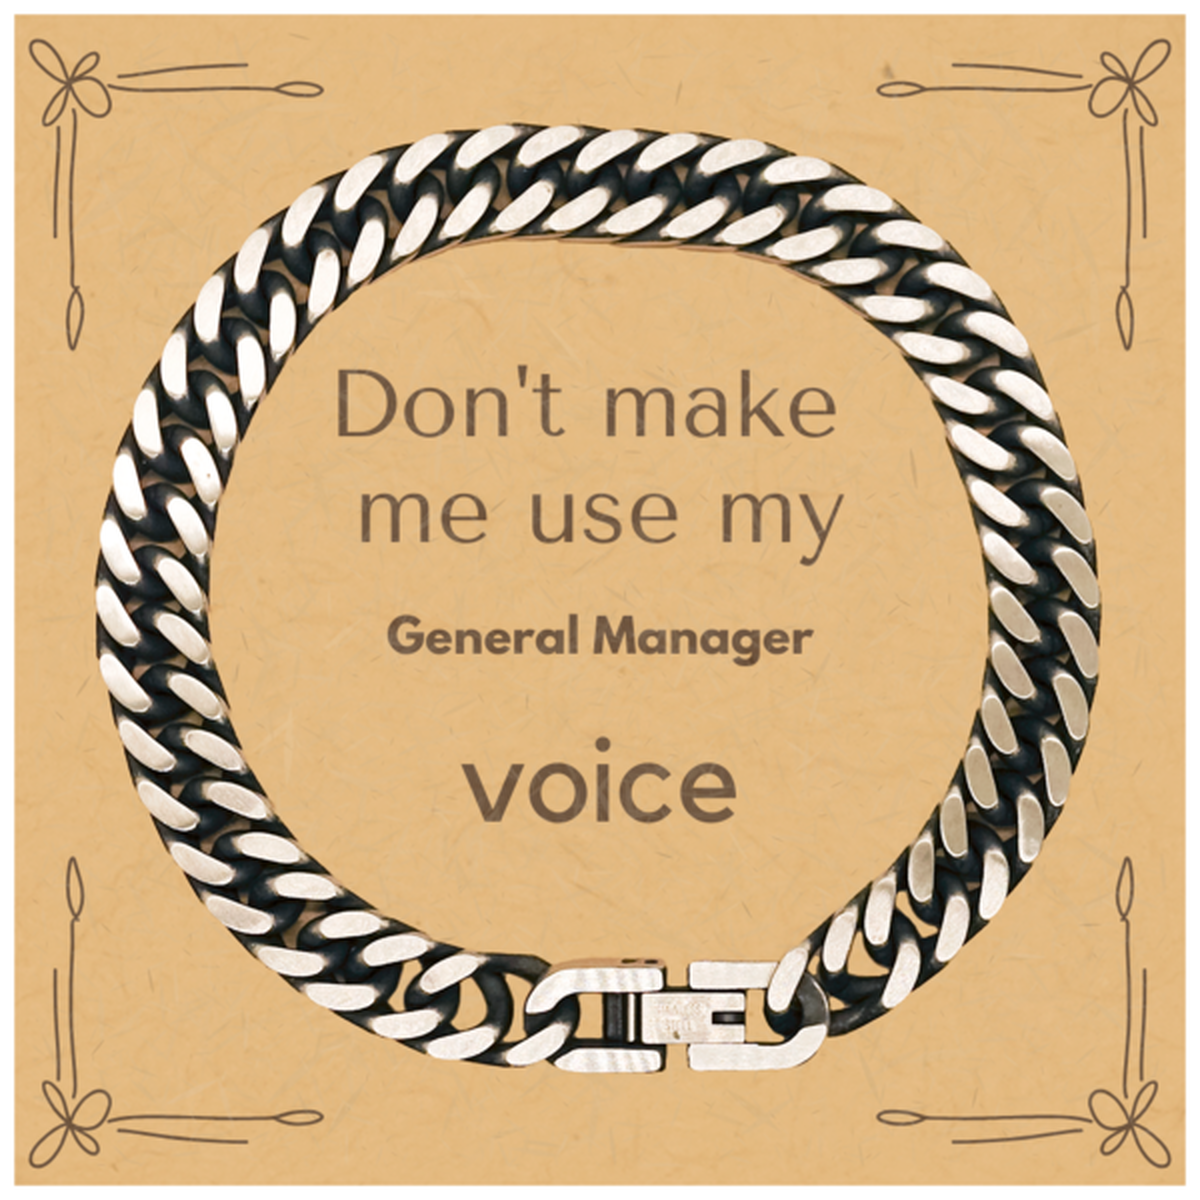 Don't make me use my General Manager voice, Sarcasm General Manager Card Gifts, Christmas General Manager Cuban Link Chain Bracelet Birthday Unique Gifts For General Manager Coworkers, Men, Women, Colleague, Friends